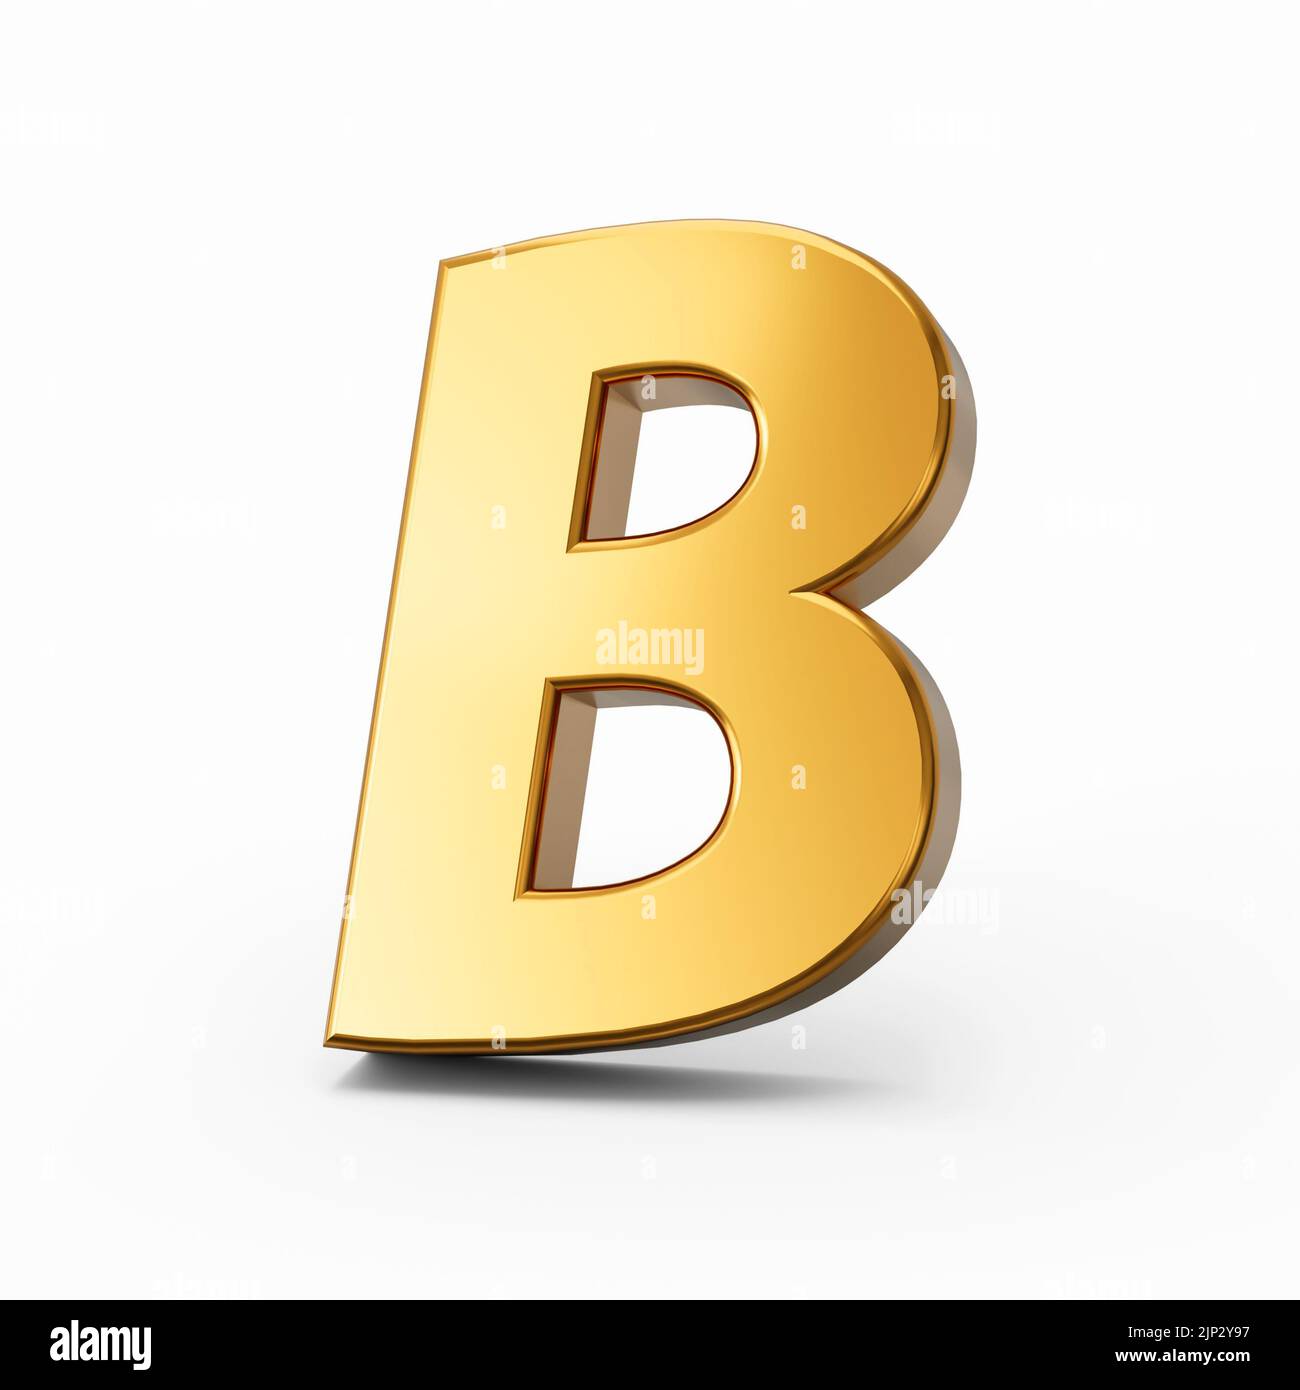 A 3d rendering of a golden capital letter B isolated on a white background Stock Photo